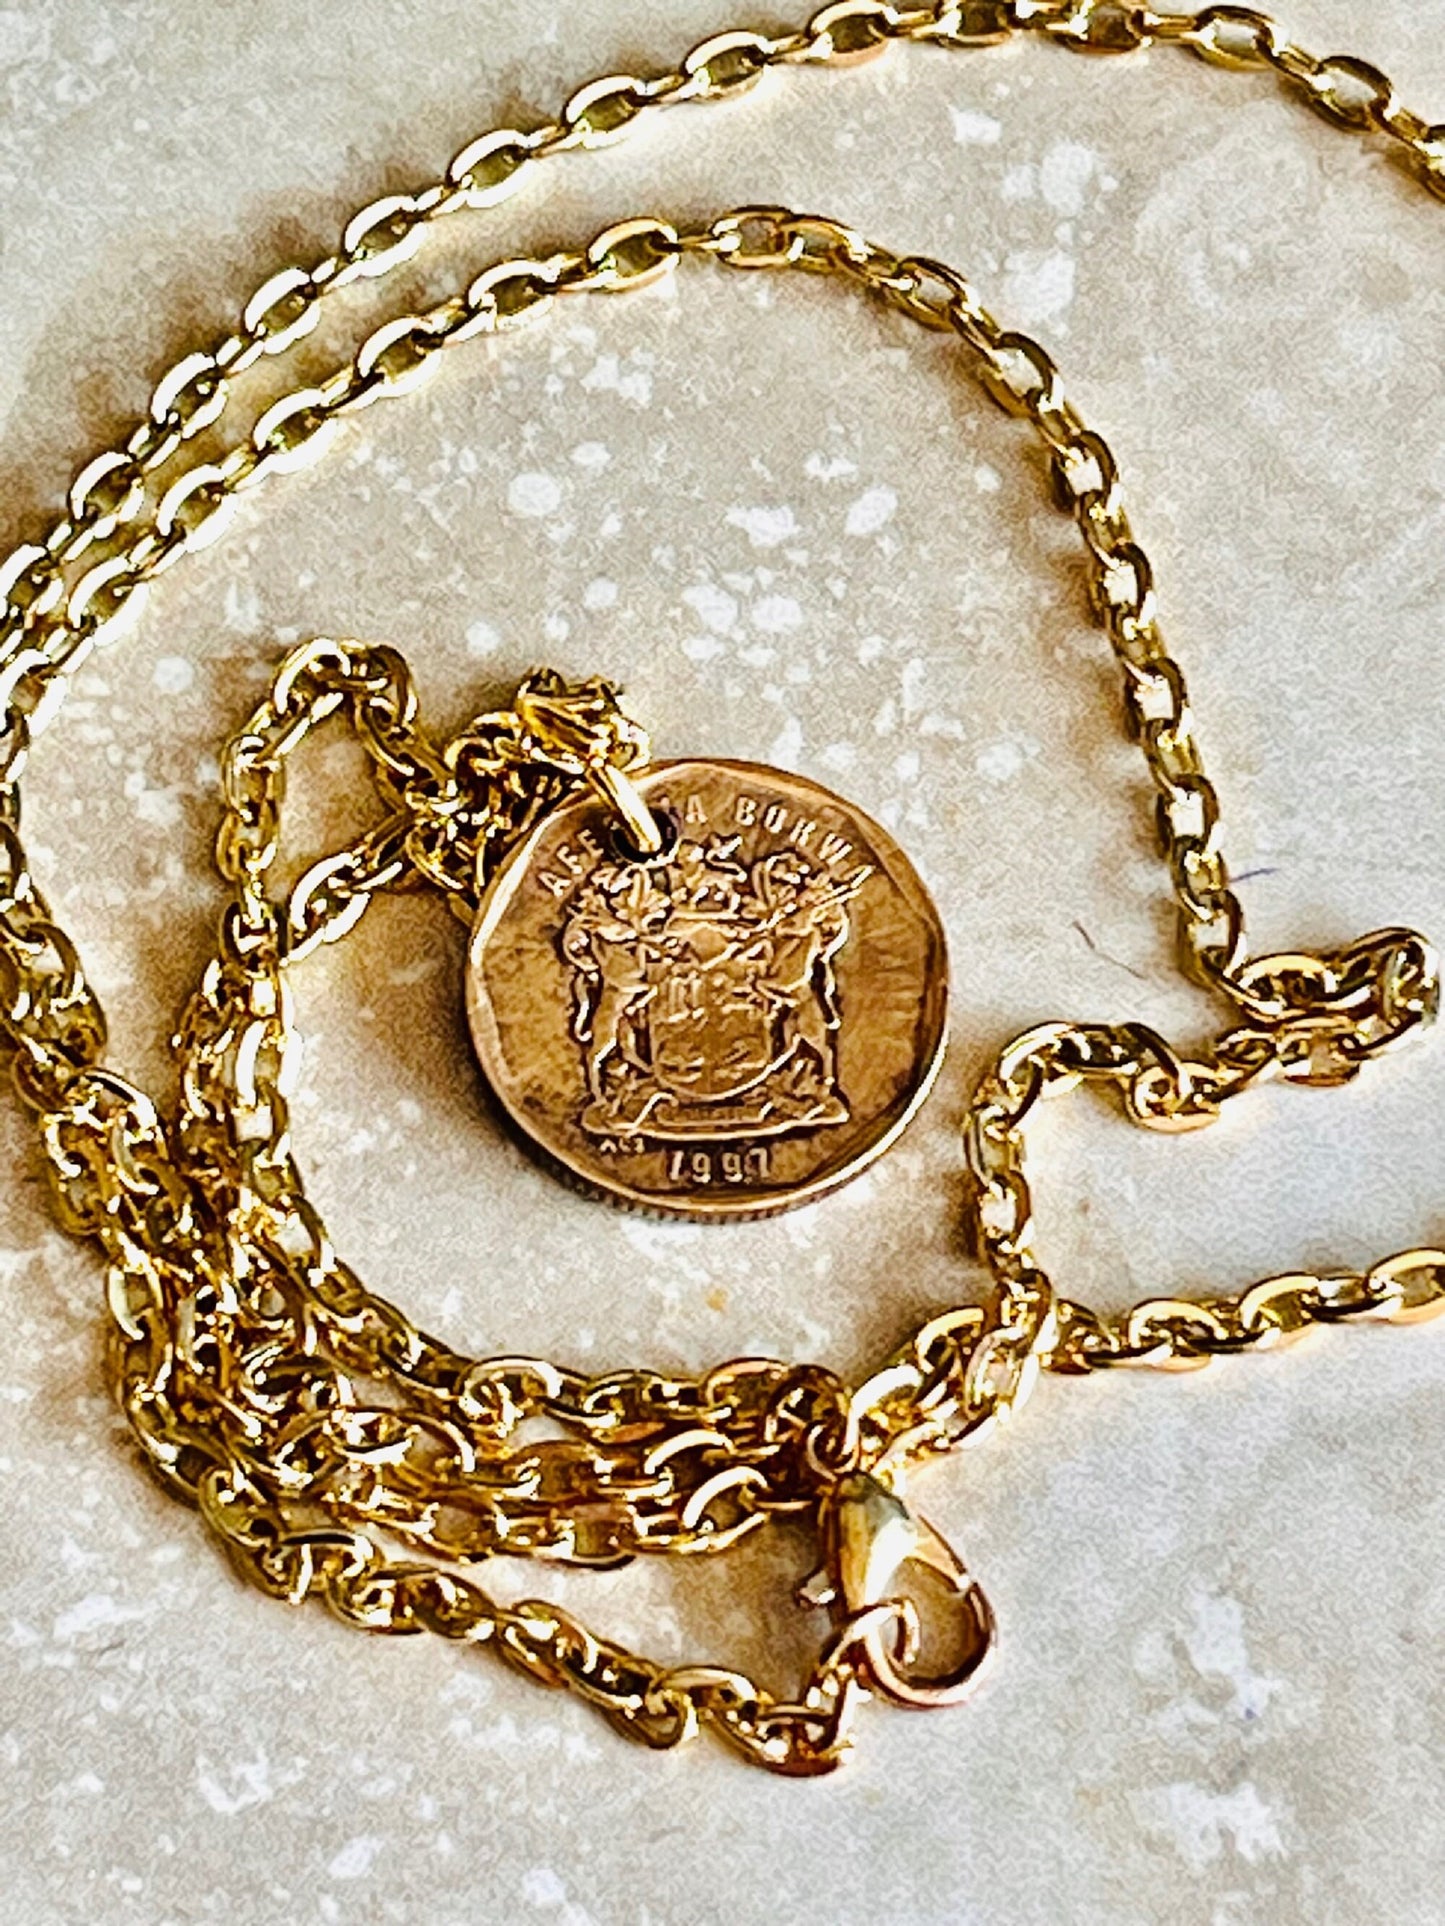 South Africa Coin Pendant African 20 Cents Personal Necklace Old Vintage Handmade Jewelry Gift Friend Charm For Him Her World Coin Collector